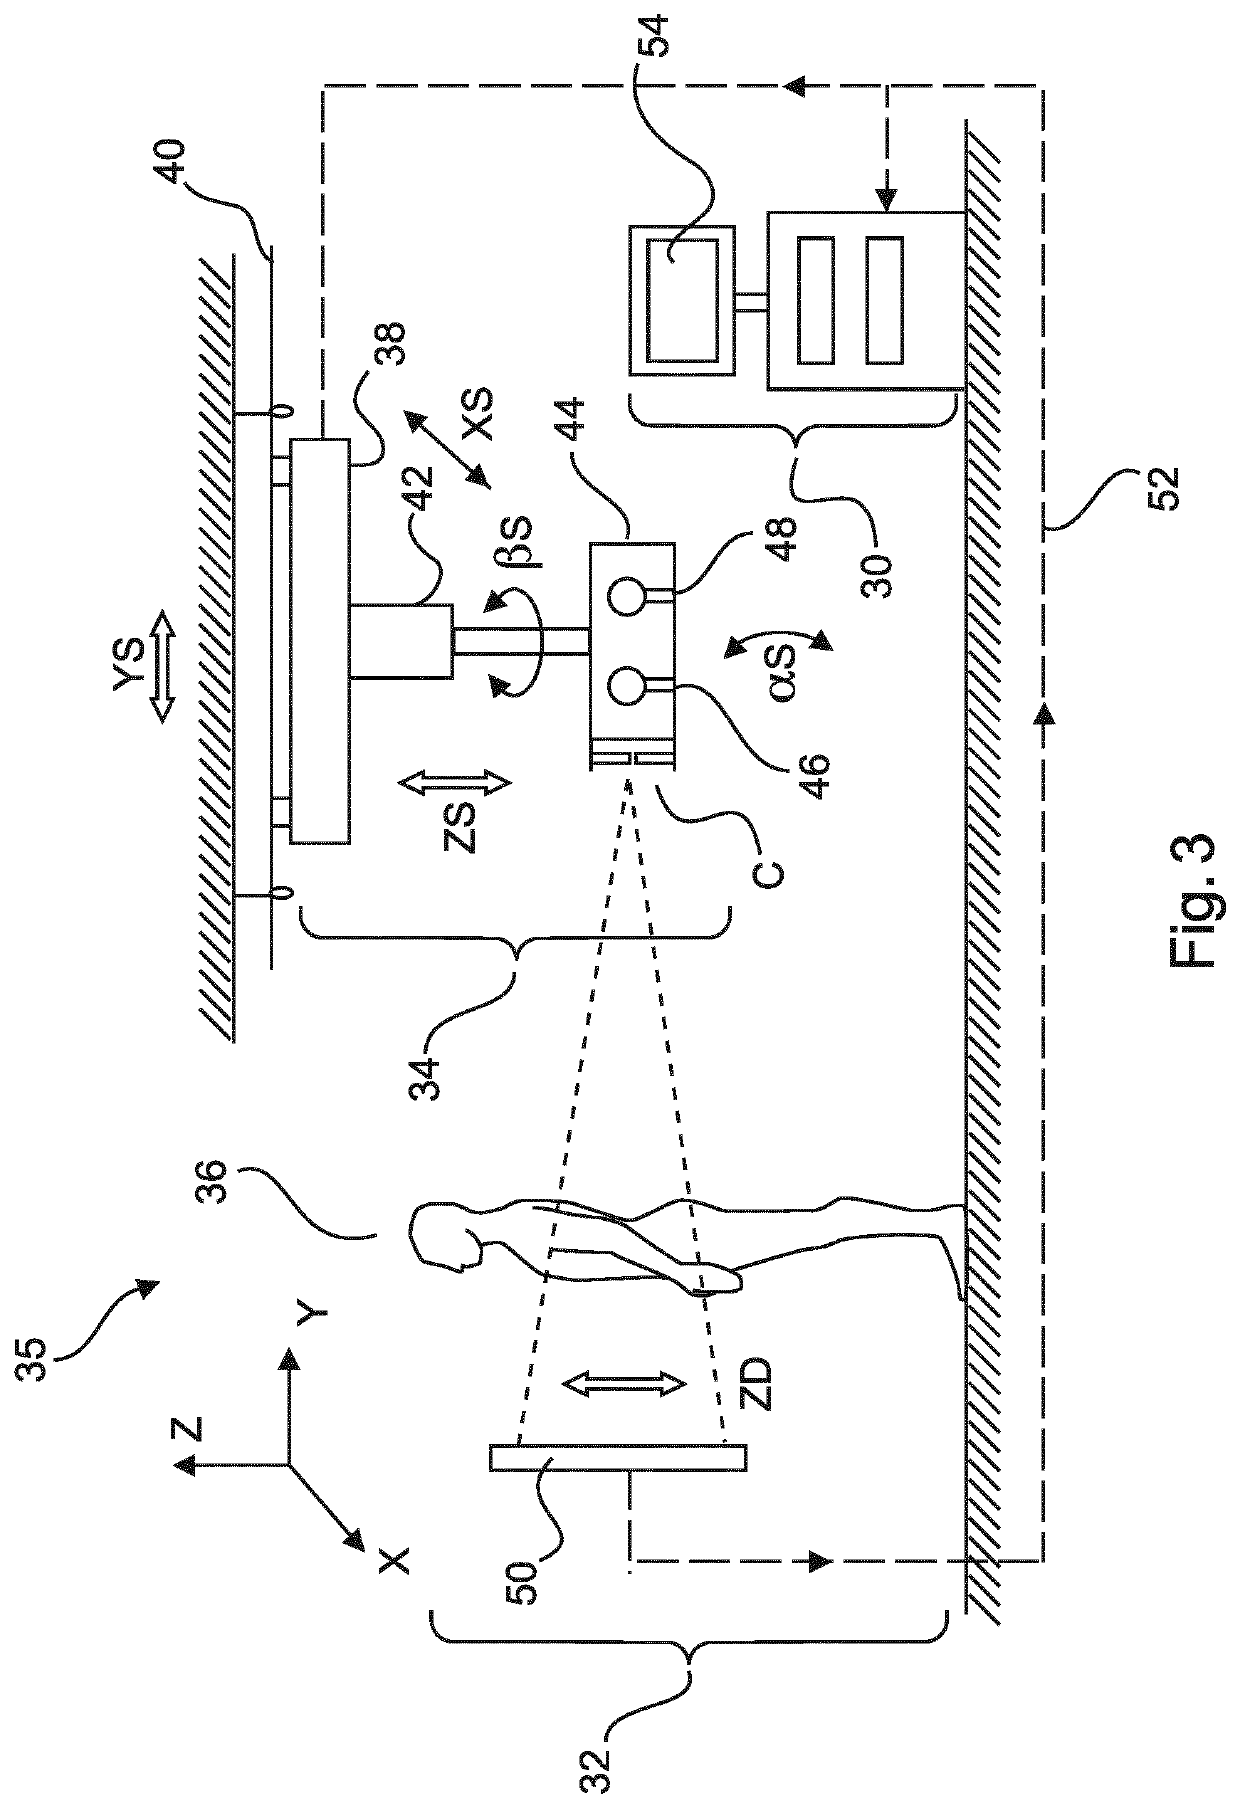 X-ray apparatus having a composite field of view